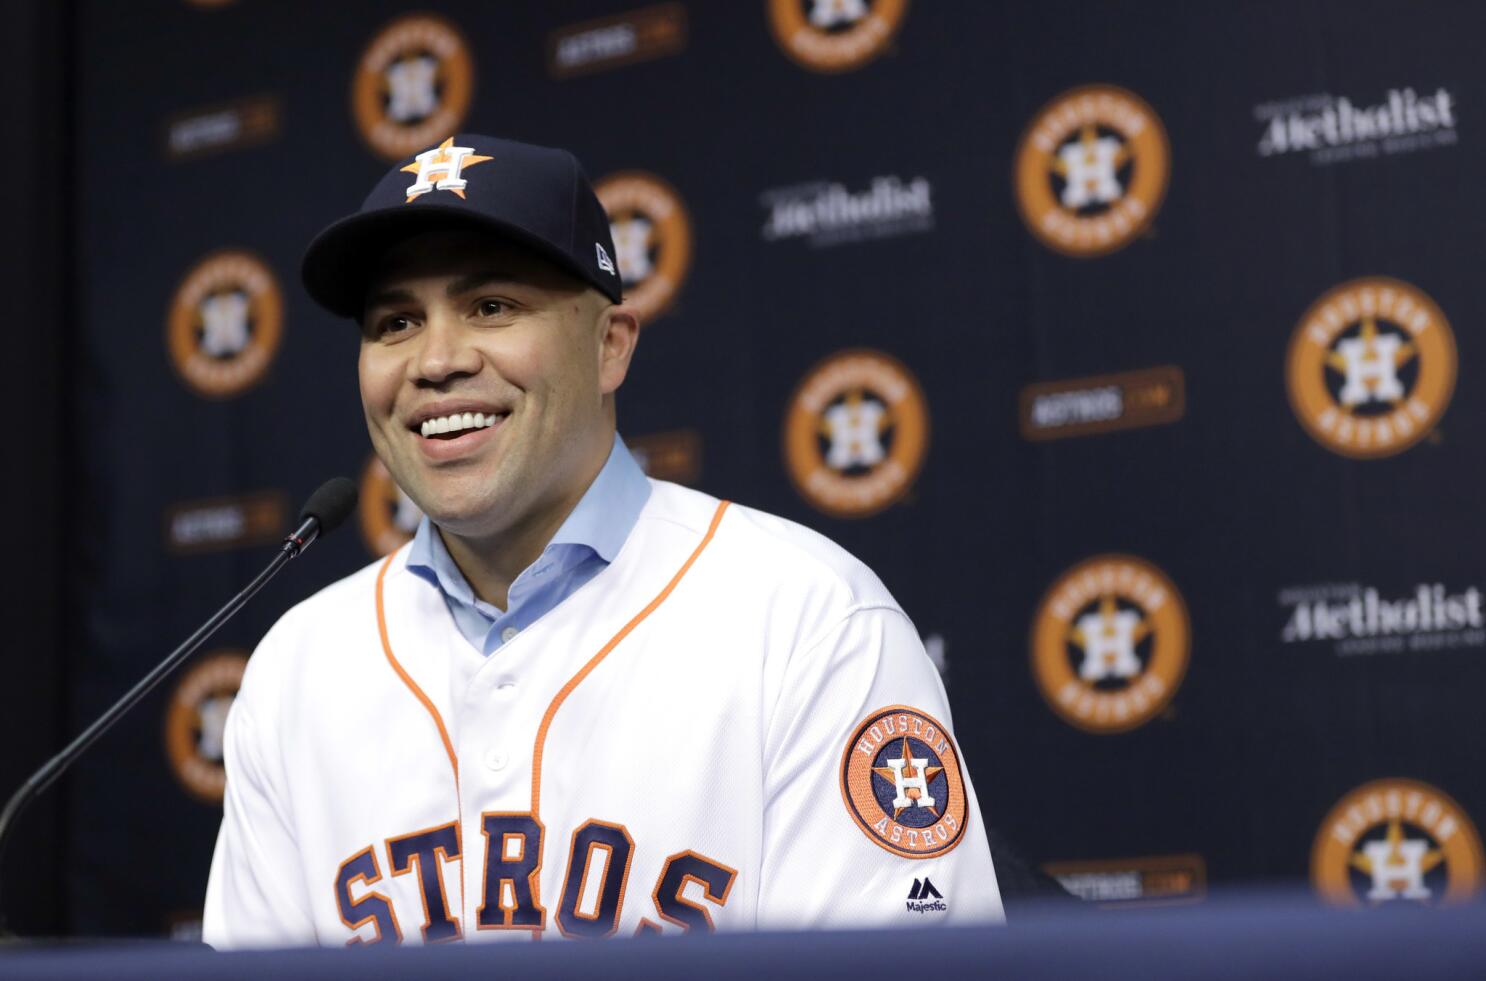 MLB notes: Carlos Beltran interviews with Yankees for manager's